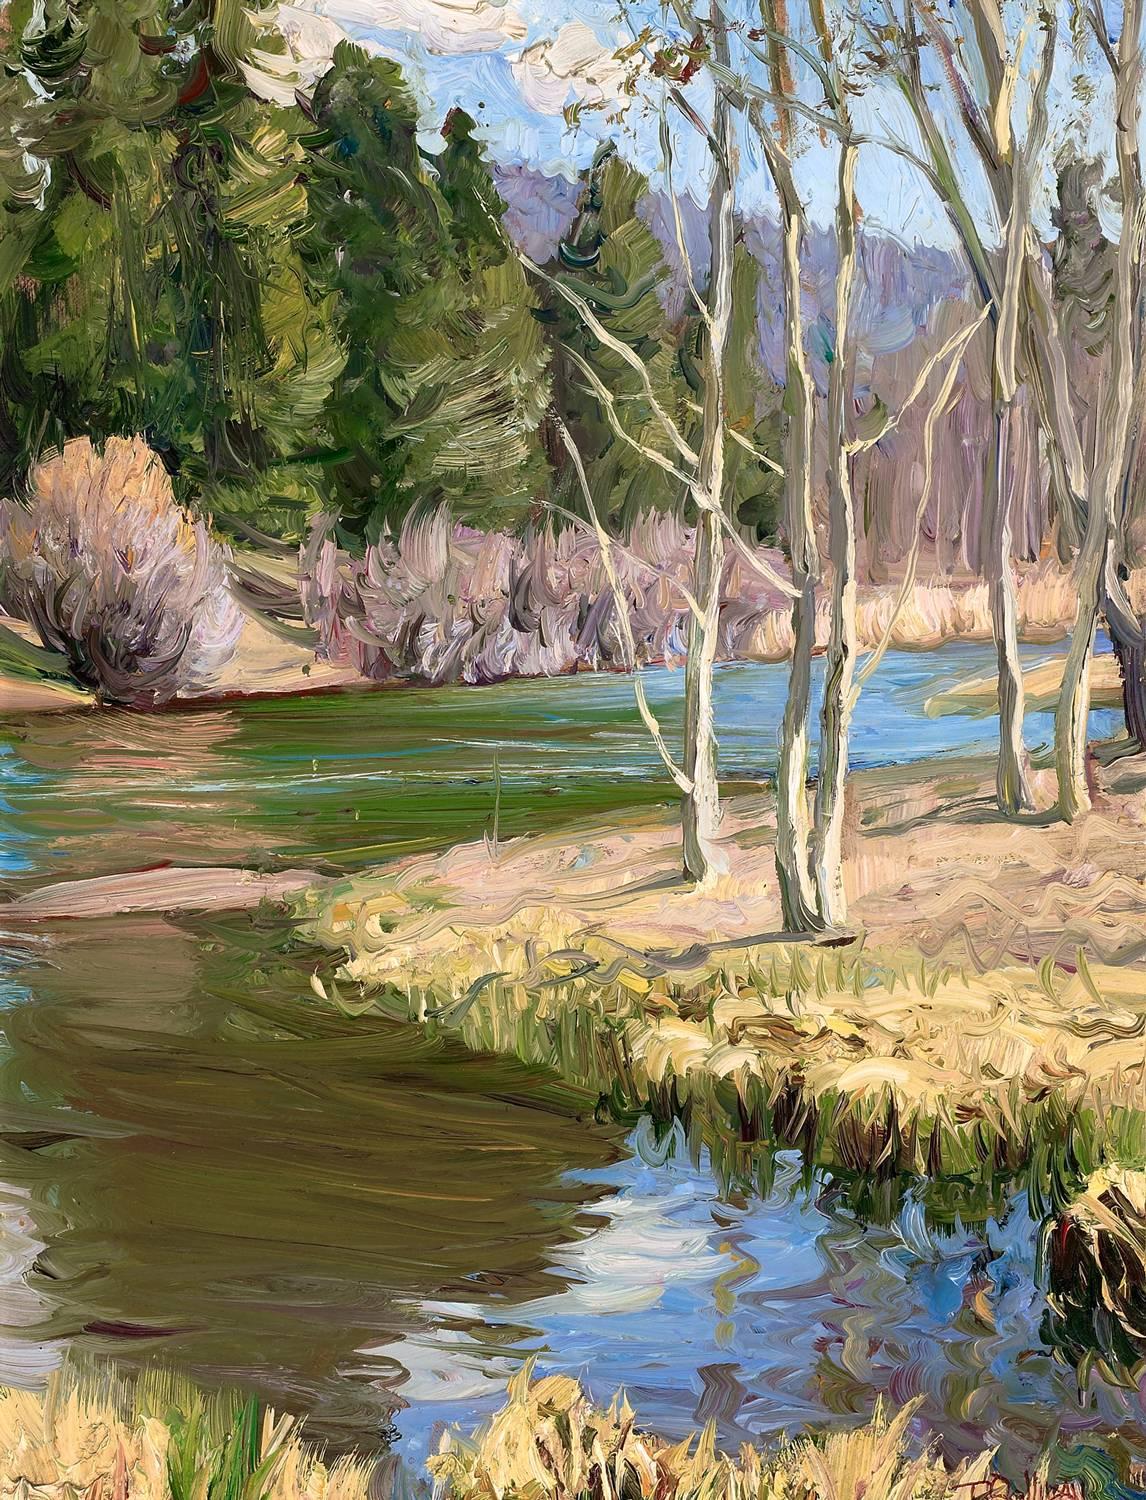 Running Waters; Taos, New Mexico - Painting by Tim Solliday